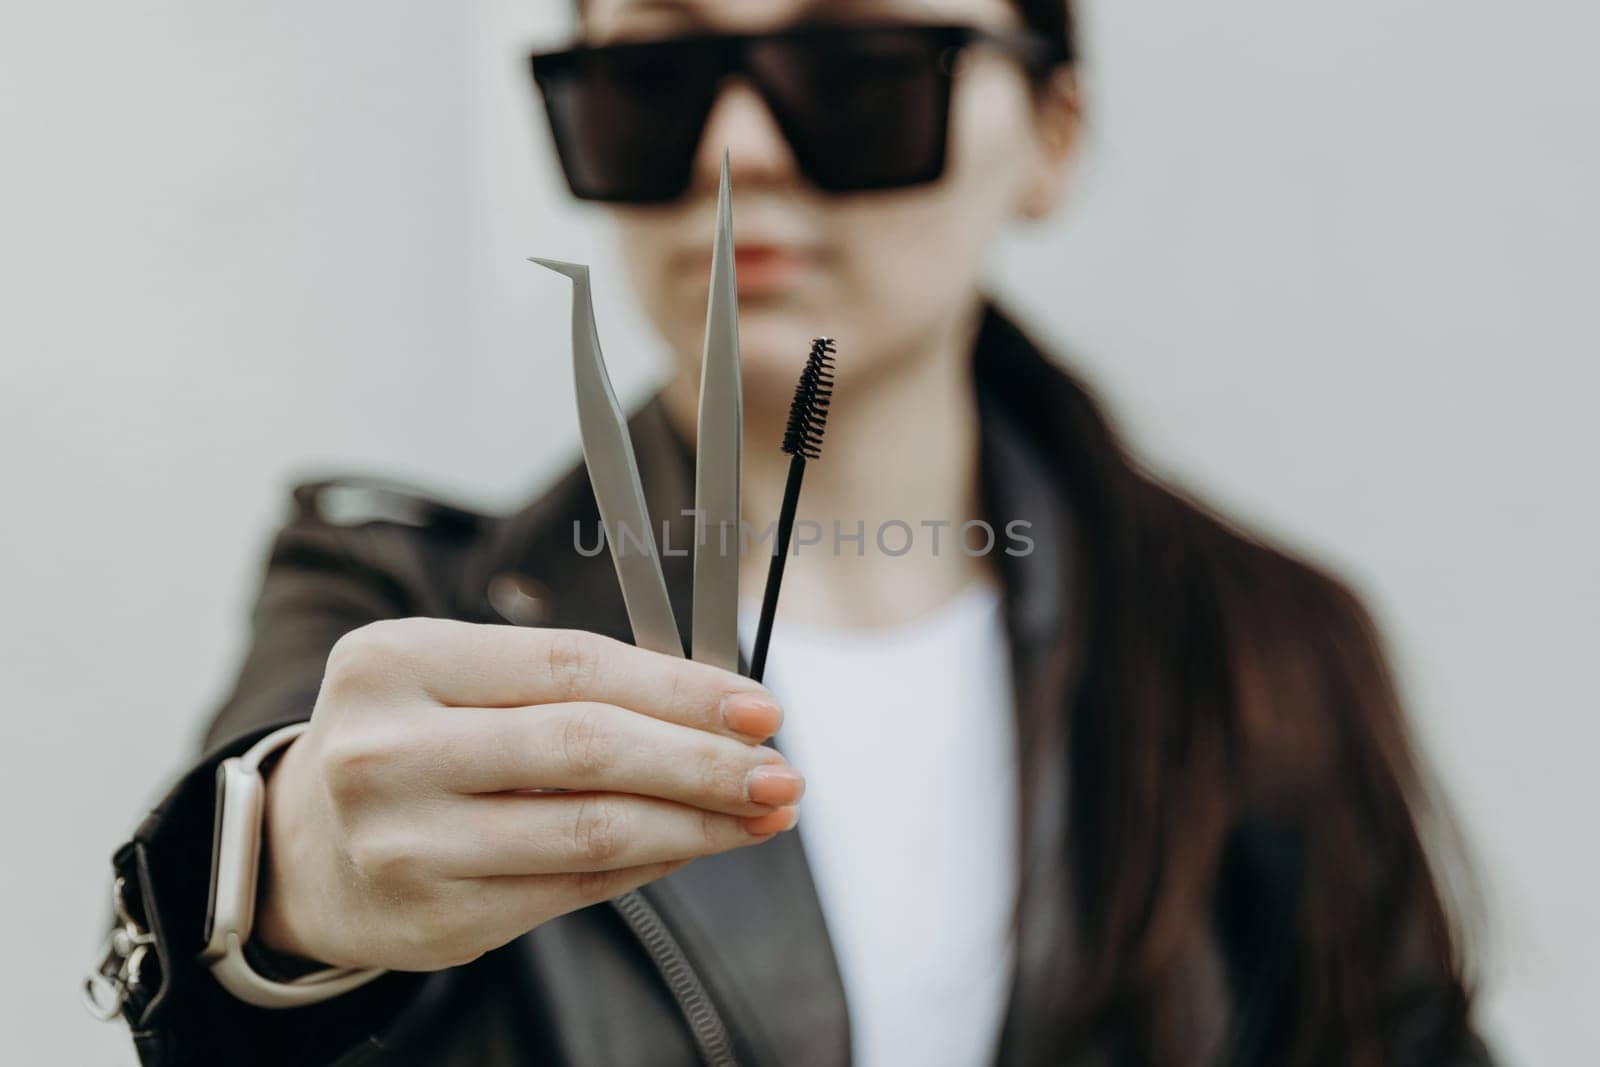 The girl shows tweezers and a brush for eyelash extensions. by Nataliya